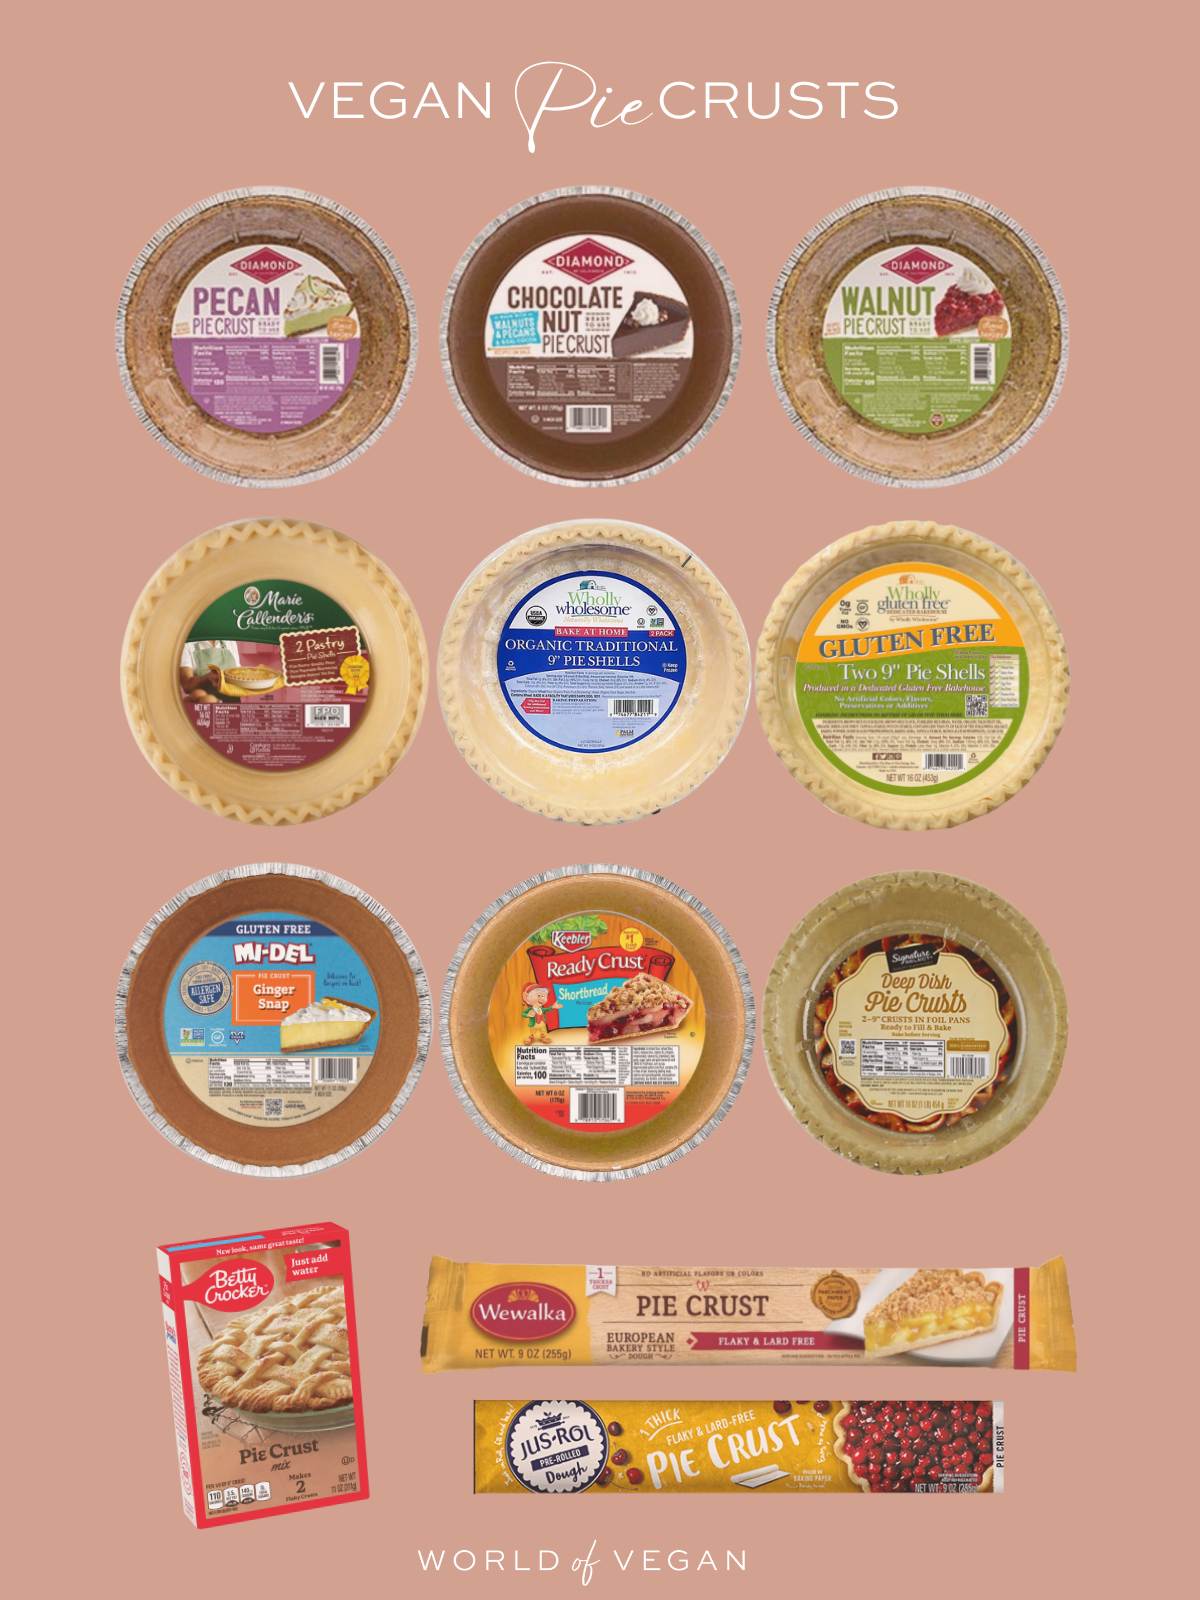 Infographic showing 12 different vegan pie crusts and brands. 